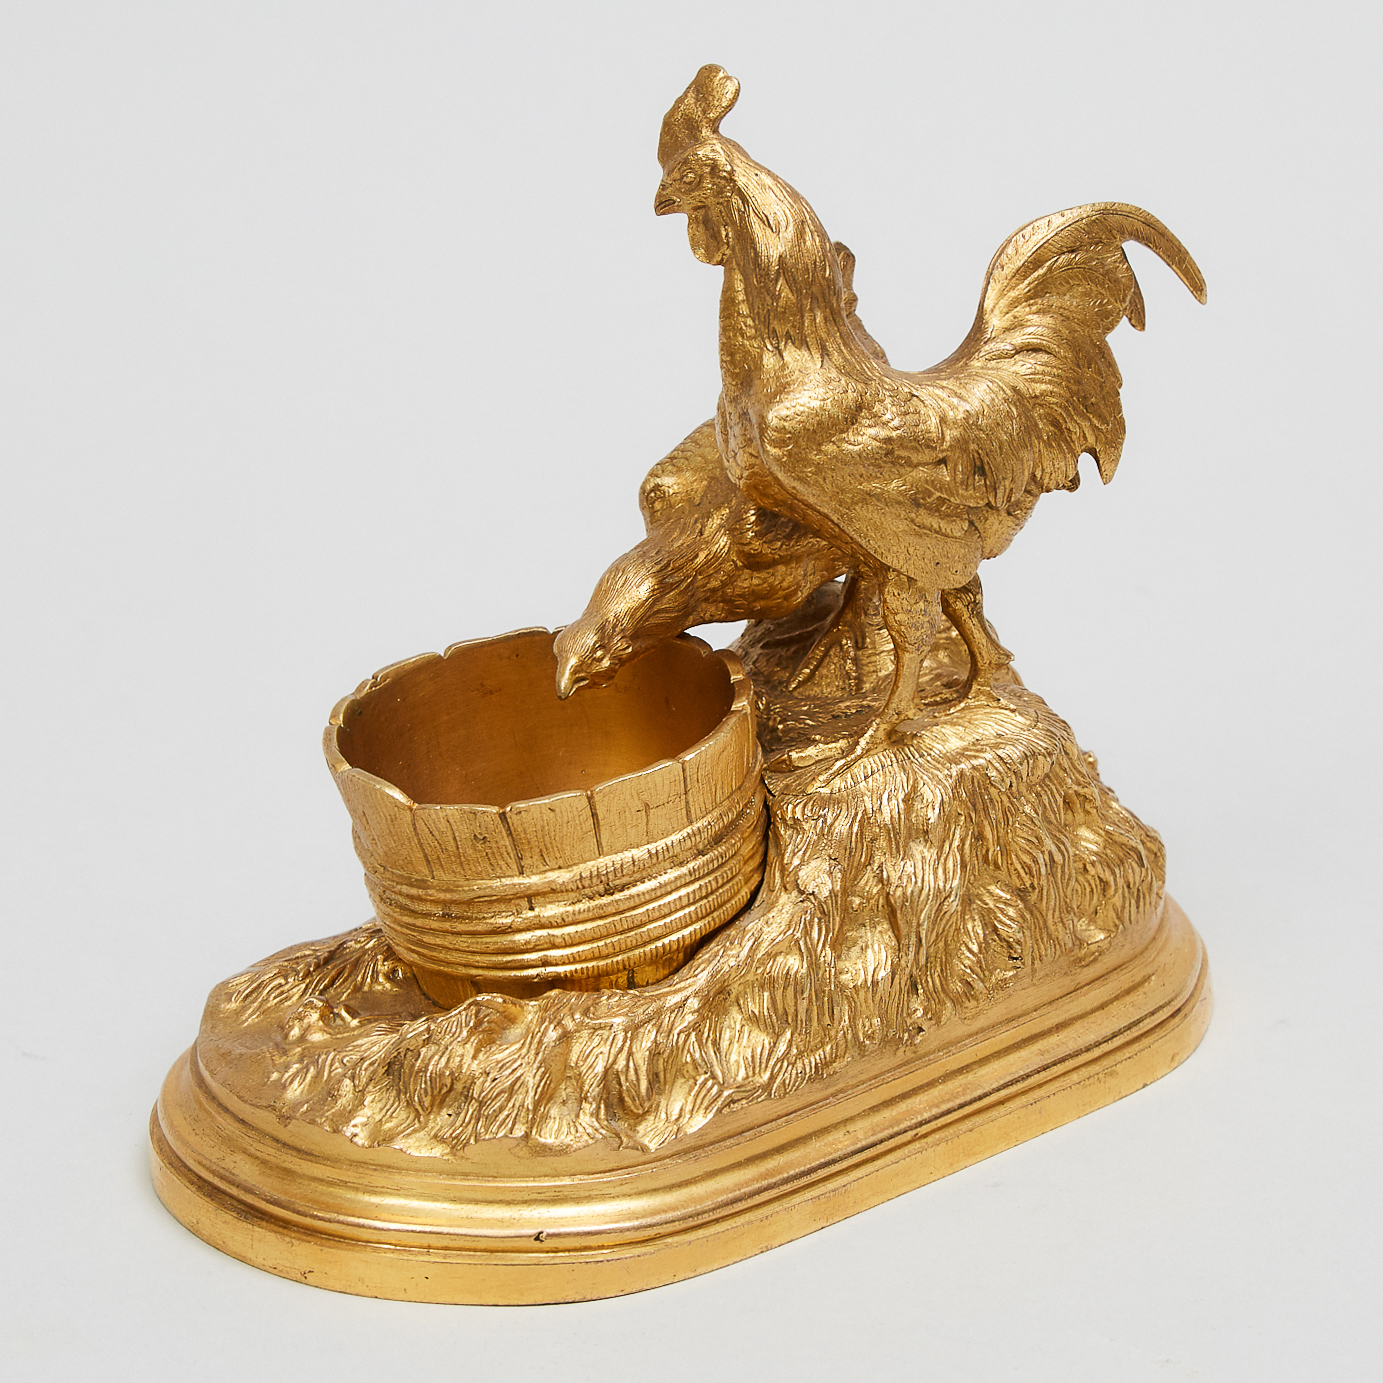 Isidore Jules Bonheur (French, 1827-1901) Gilt Bronze Animalier Group Modelled as Cockerel and Hen Feeding at a Barrel, 19th century